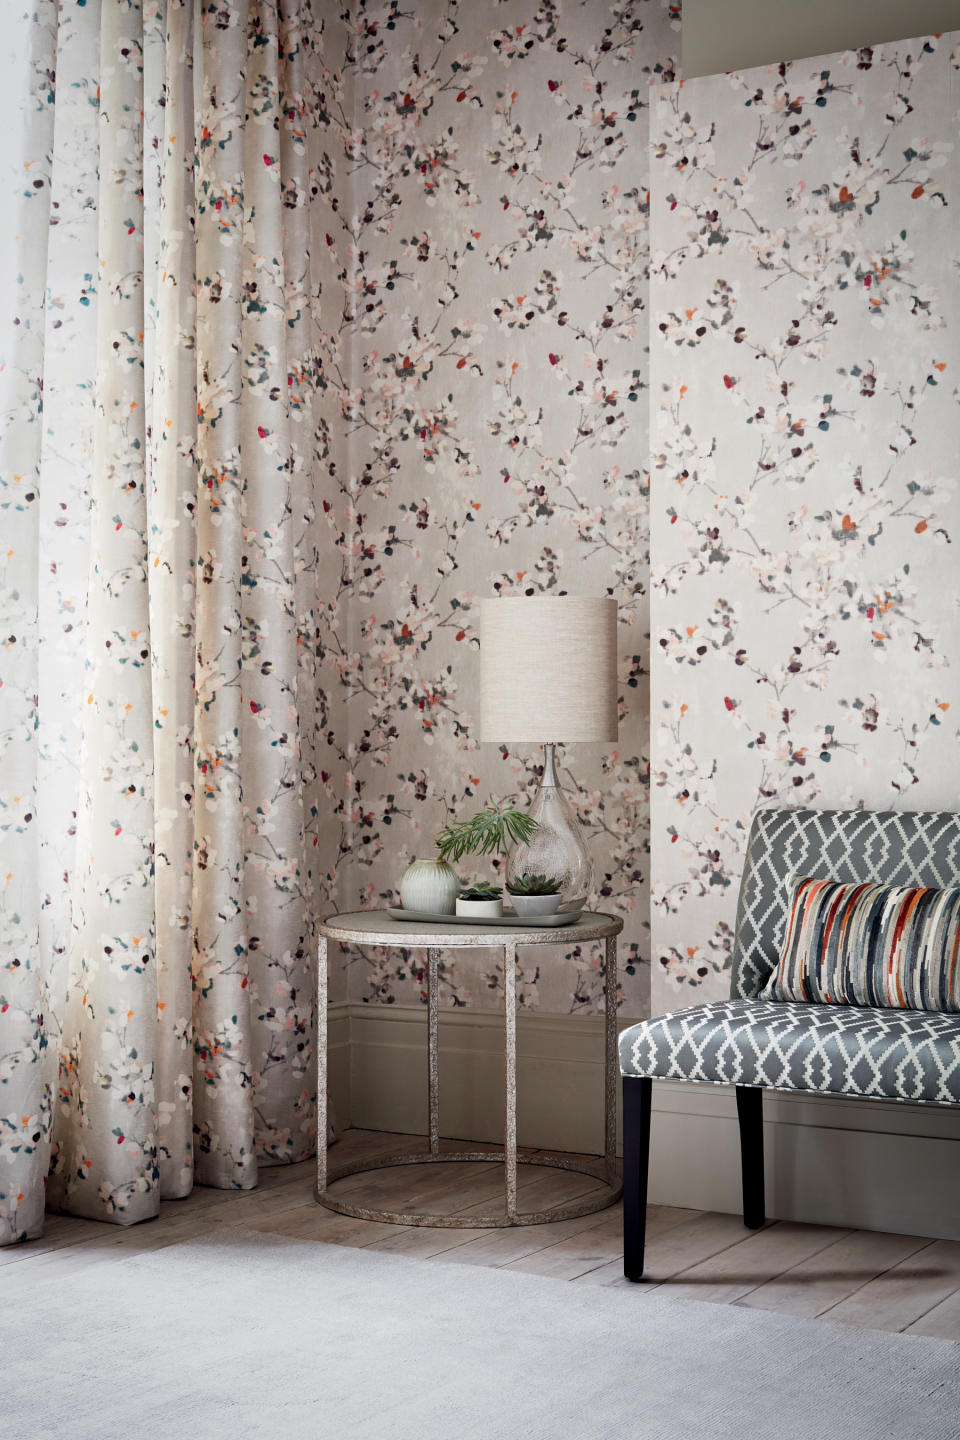 <p> As with every color, there are different tones of grey to choose from. This very pretty Floris wallpaper in Spring Rose from Romo has a warm grey background which is fitting for the Japanese style blossoming branches that appear hand-painted. It has a pearlescent finish which adds a gentle sheen to the surface which reflects the light. </p>